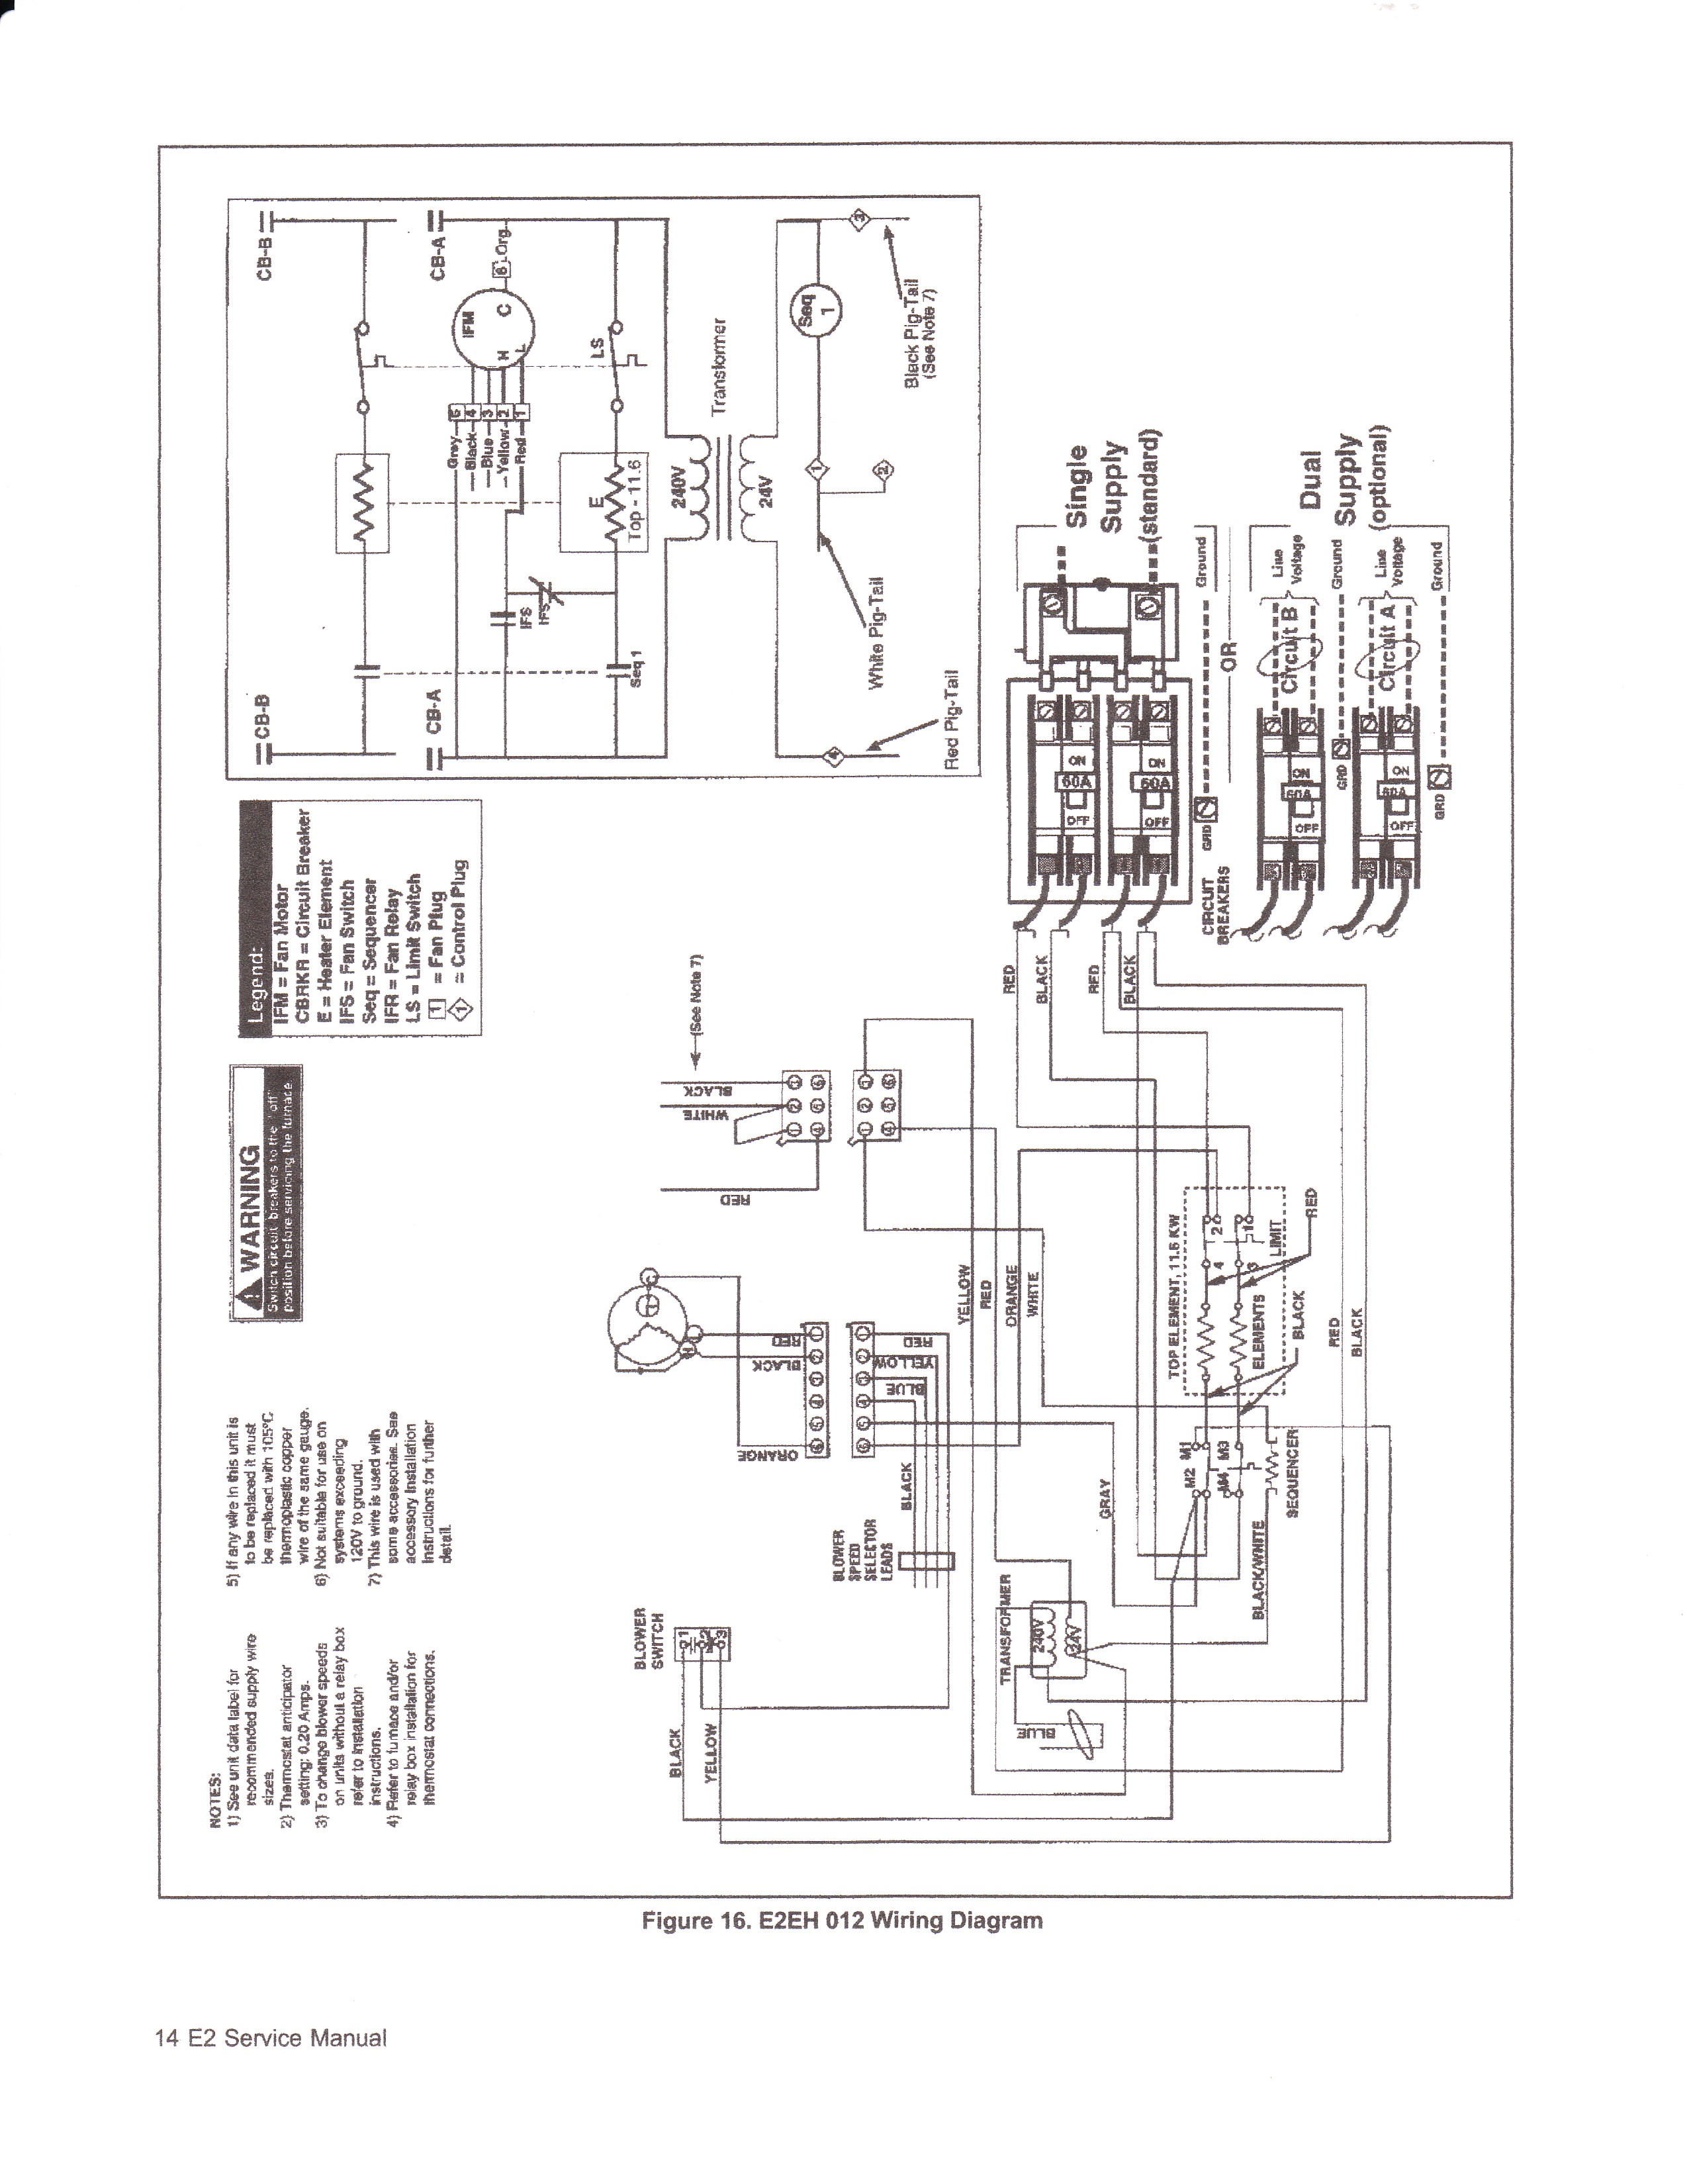 Intertherm Electric Furnace Wiring Diagram With